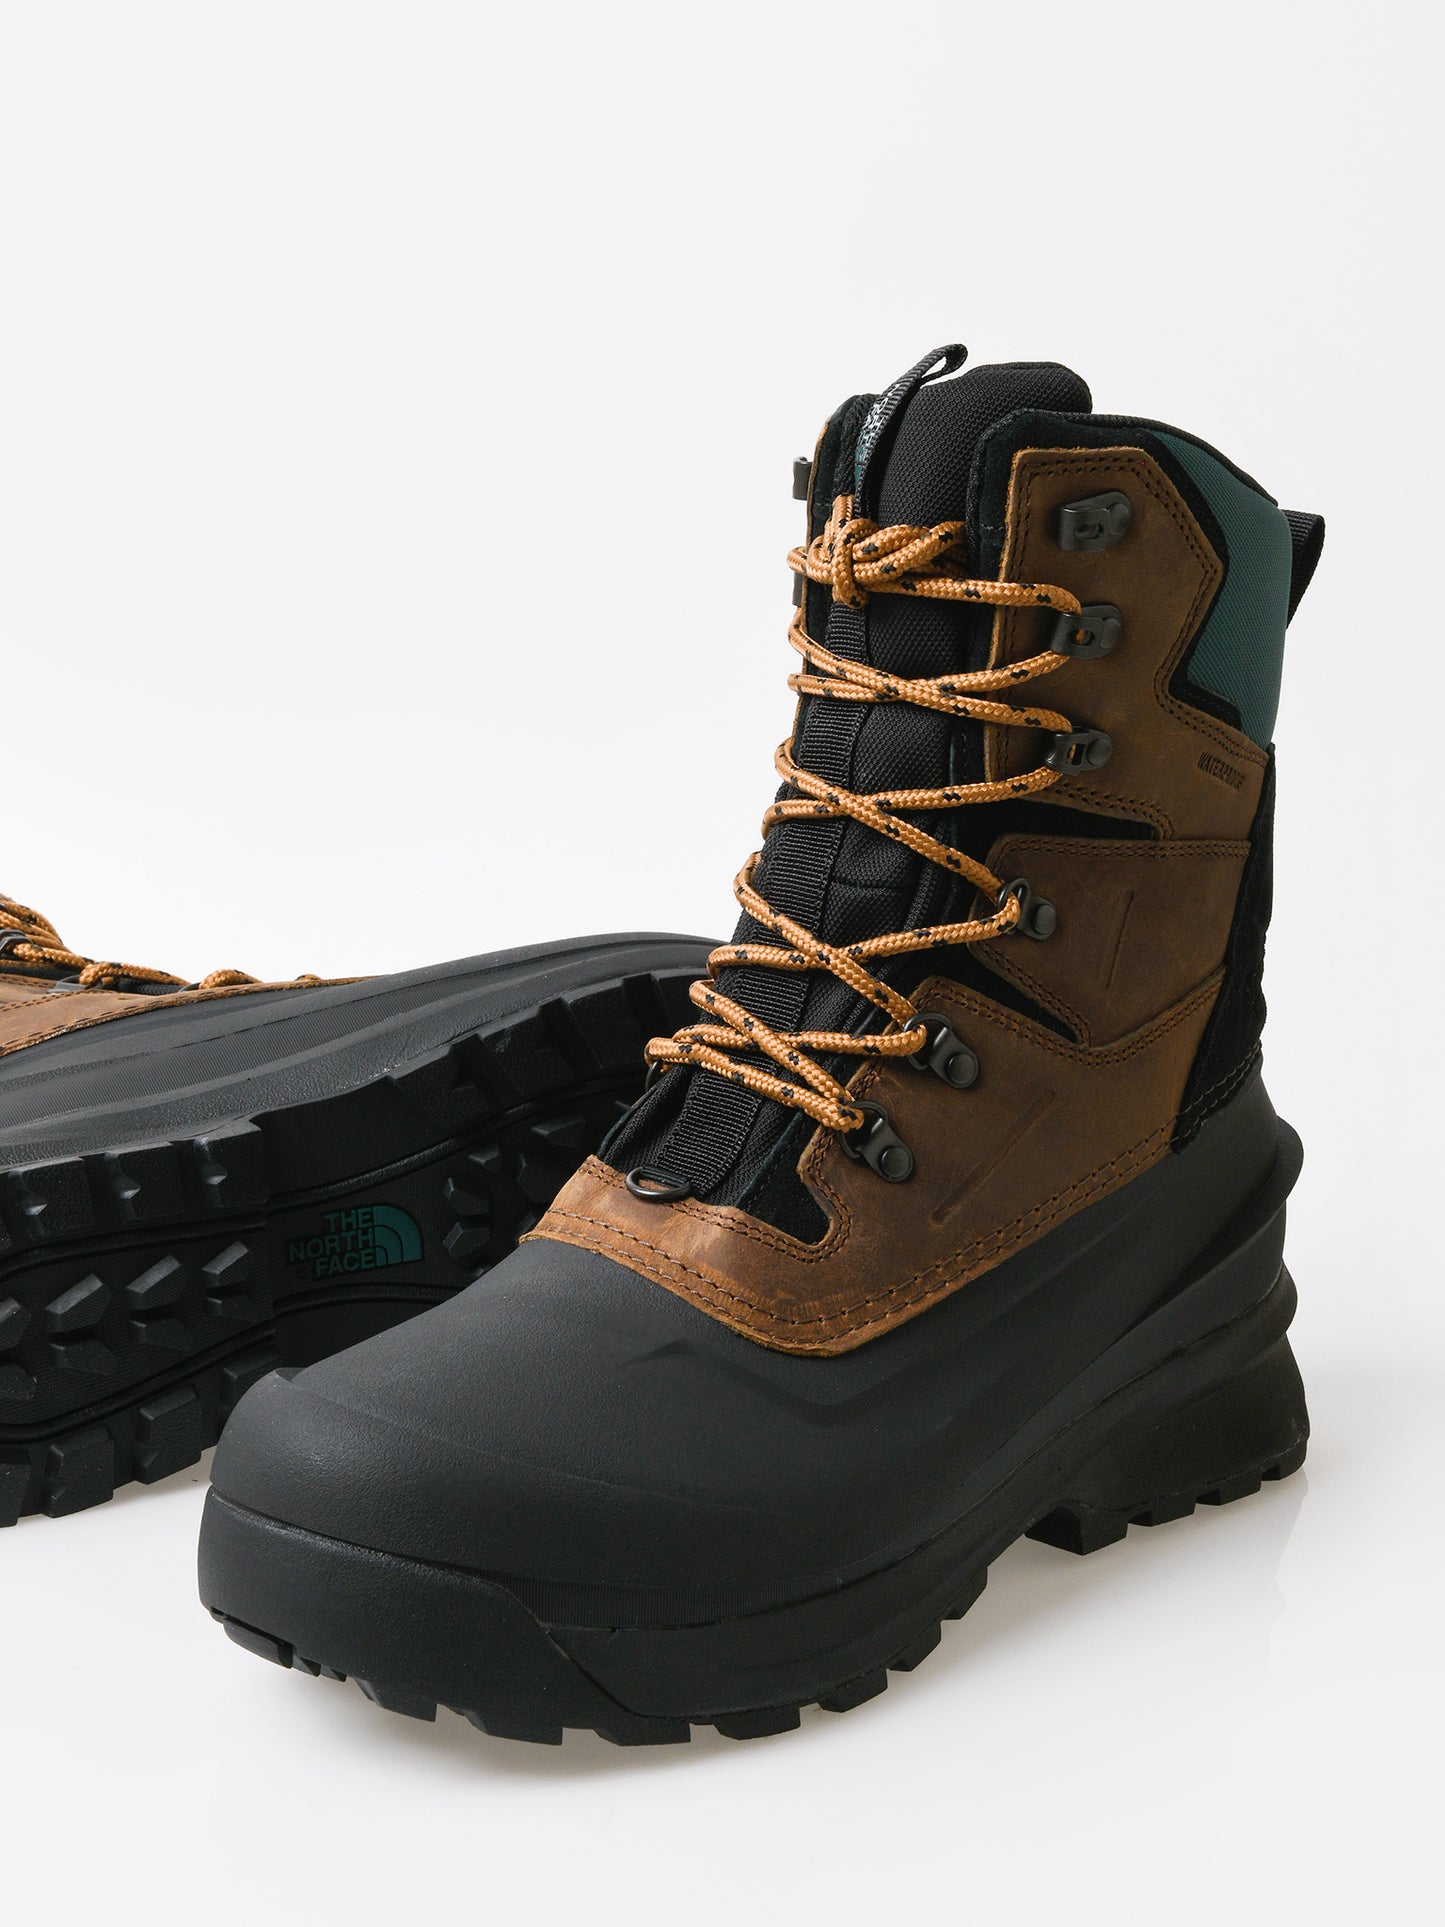 The North Face Men's Chilkat V 400 Waterproof Boot